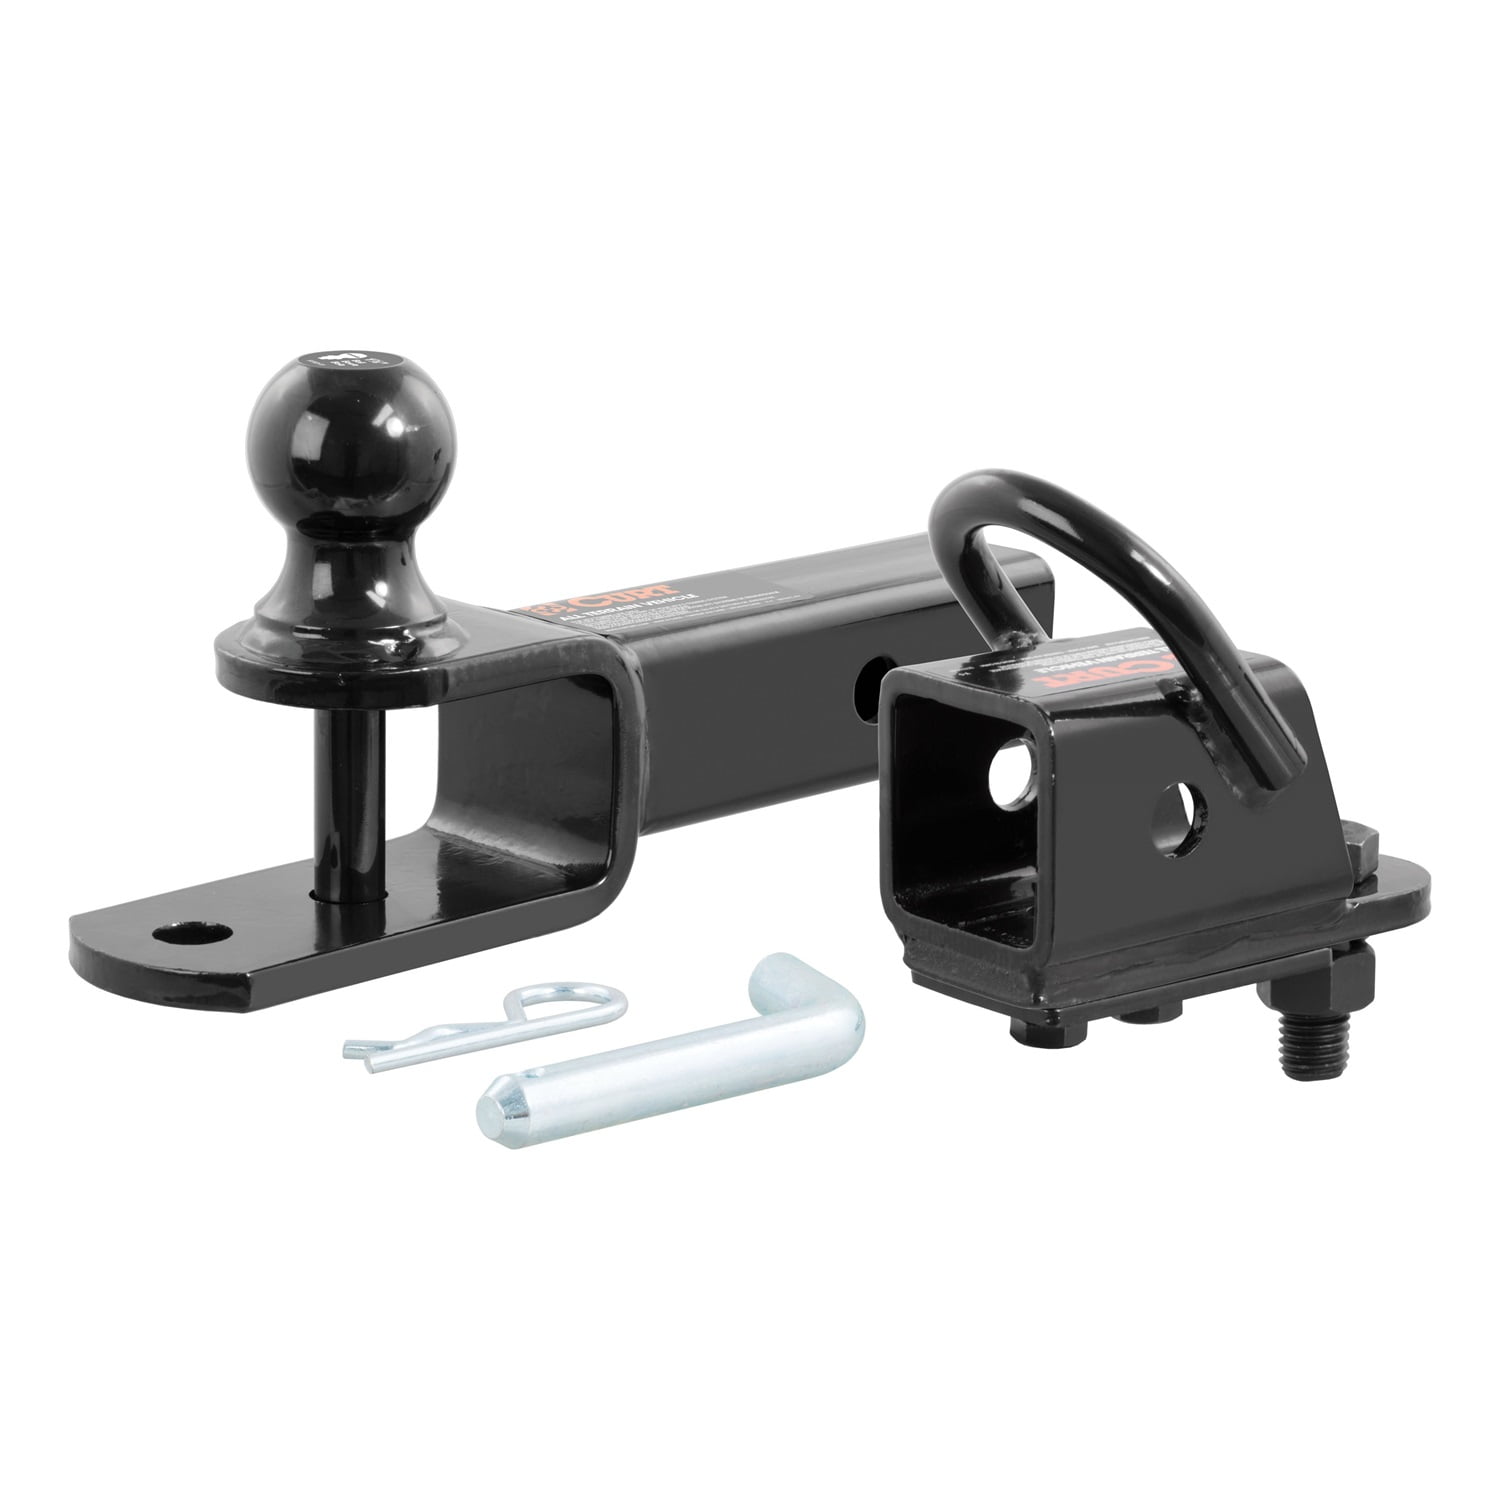 5/8-Inch Hole CURT 45029 3-in-1 ATV Hitch Ball Mount with 2-Inch Receiver Adapter 1-7/8-Inch Ball Clevis Pin 